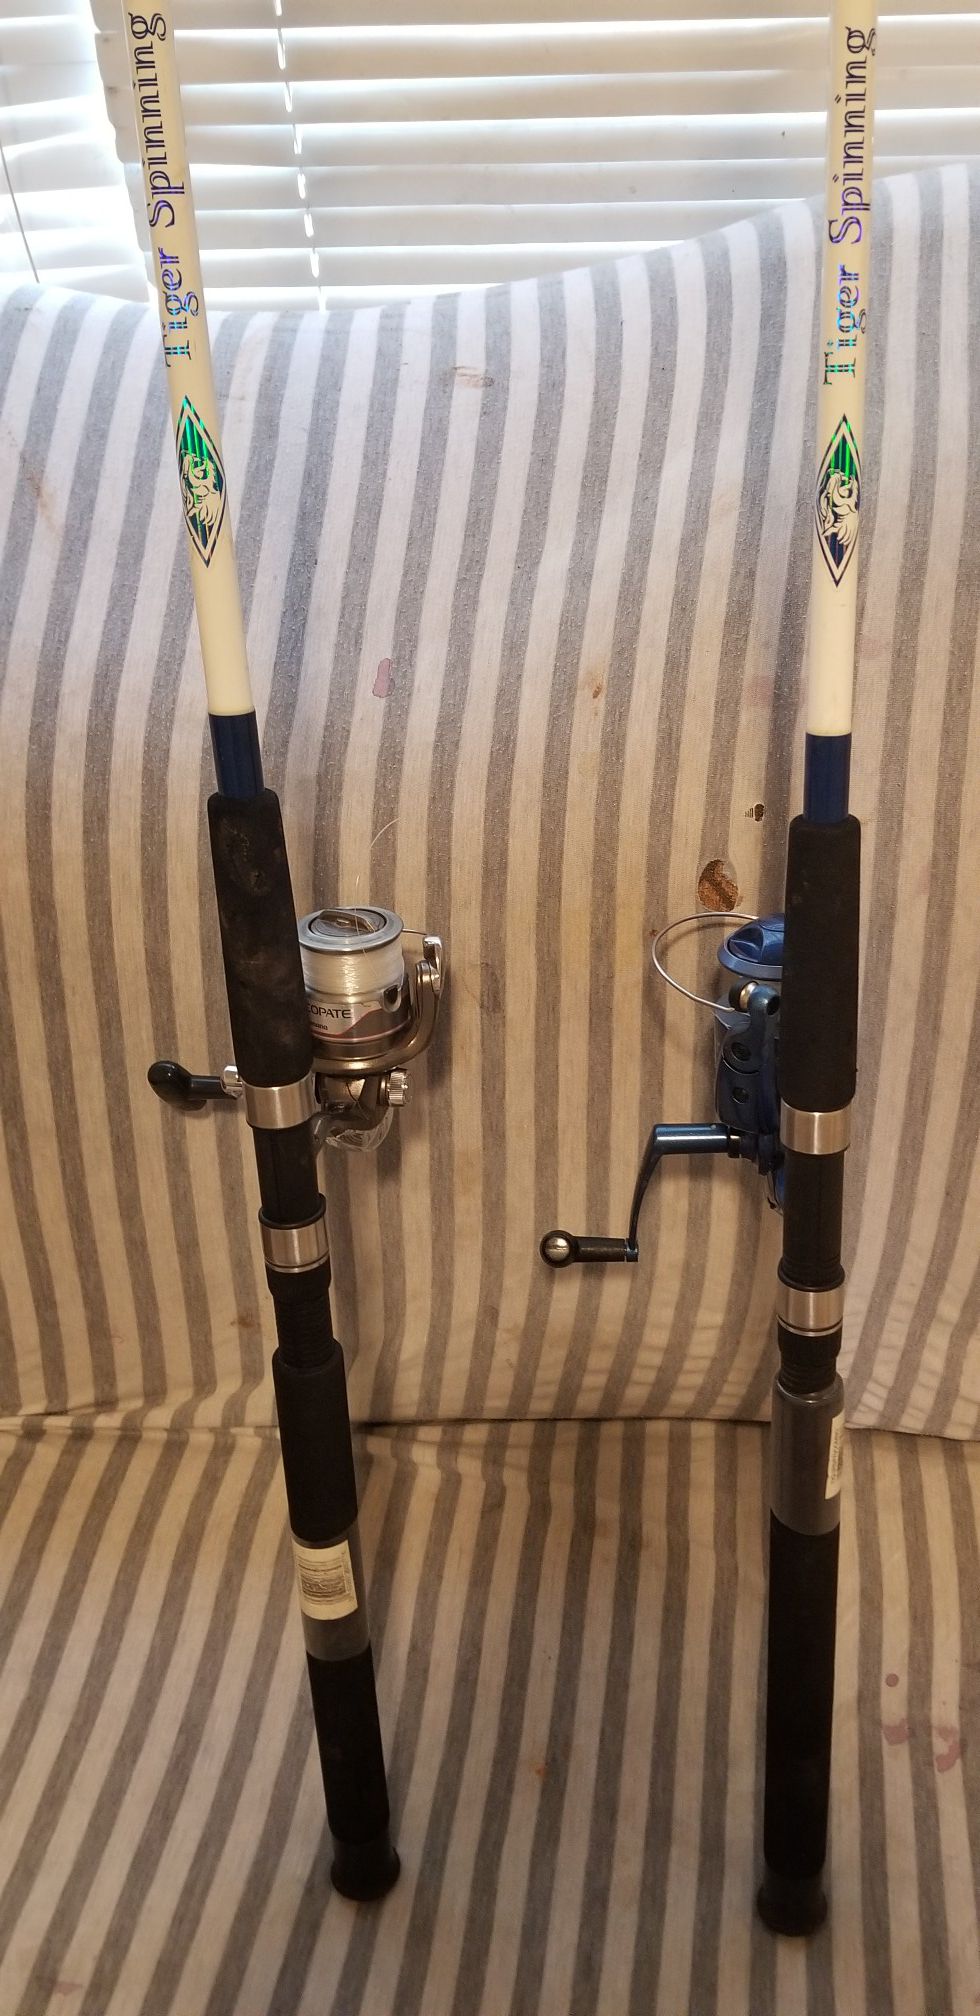 Shakespeare fishing rod with real both 7"10-15lb both 50